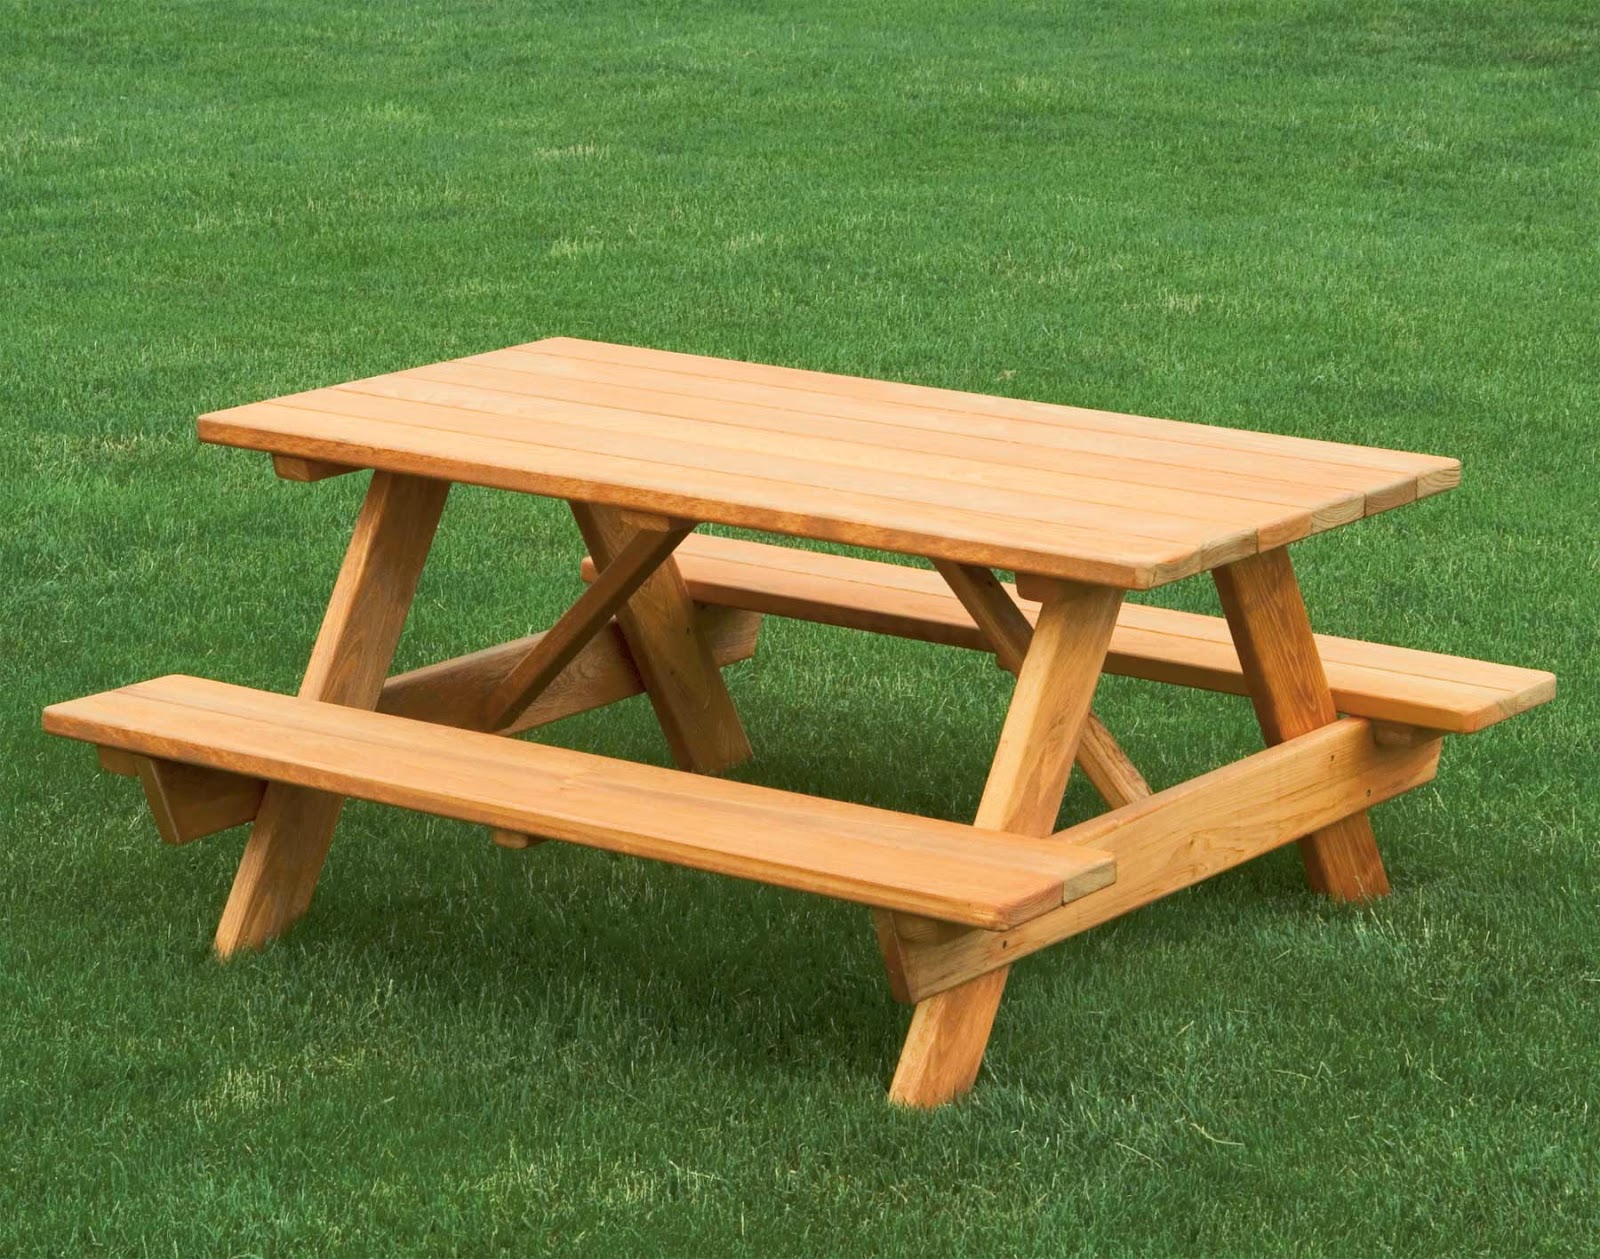 Woodworking Plans Reviewed: How to Build a Picnic Table ...